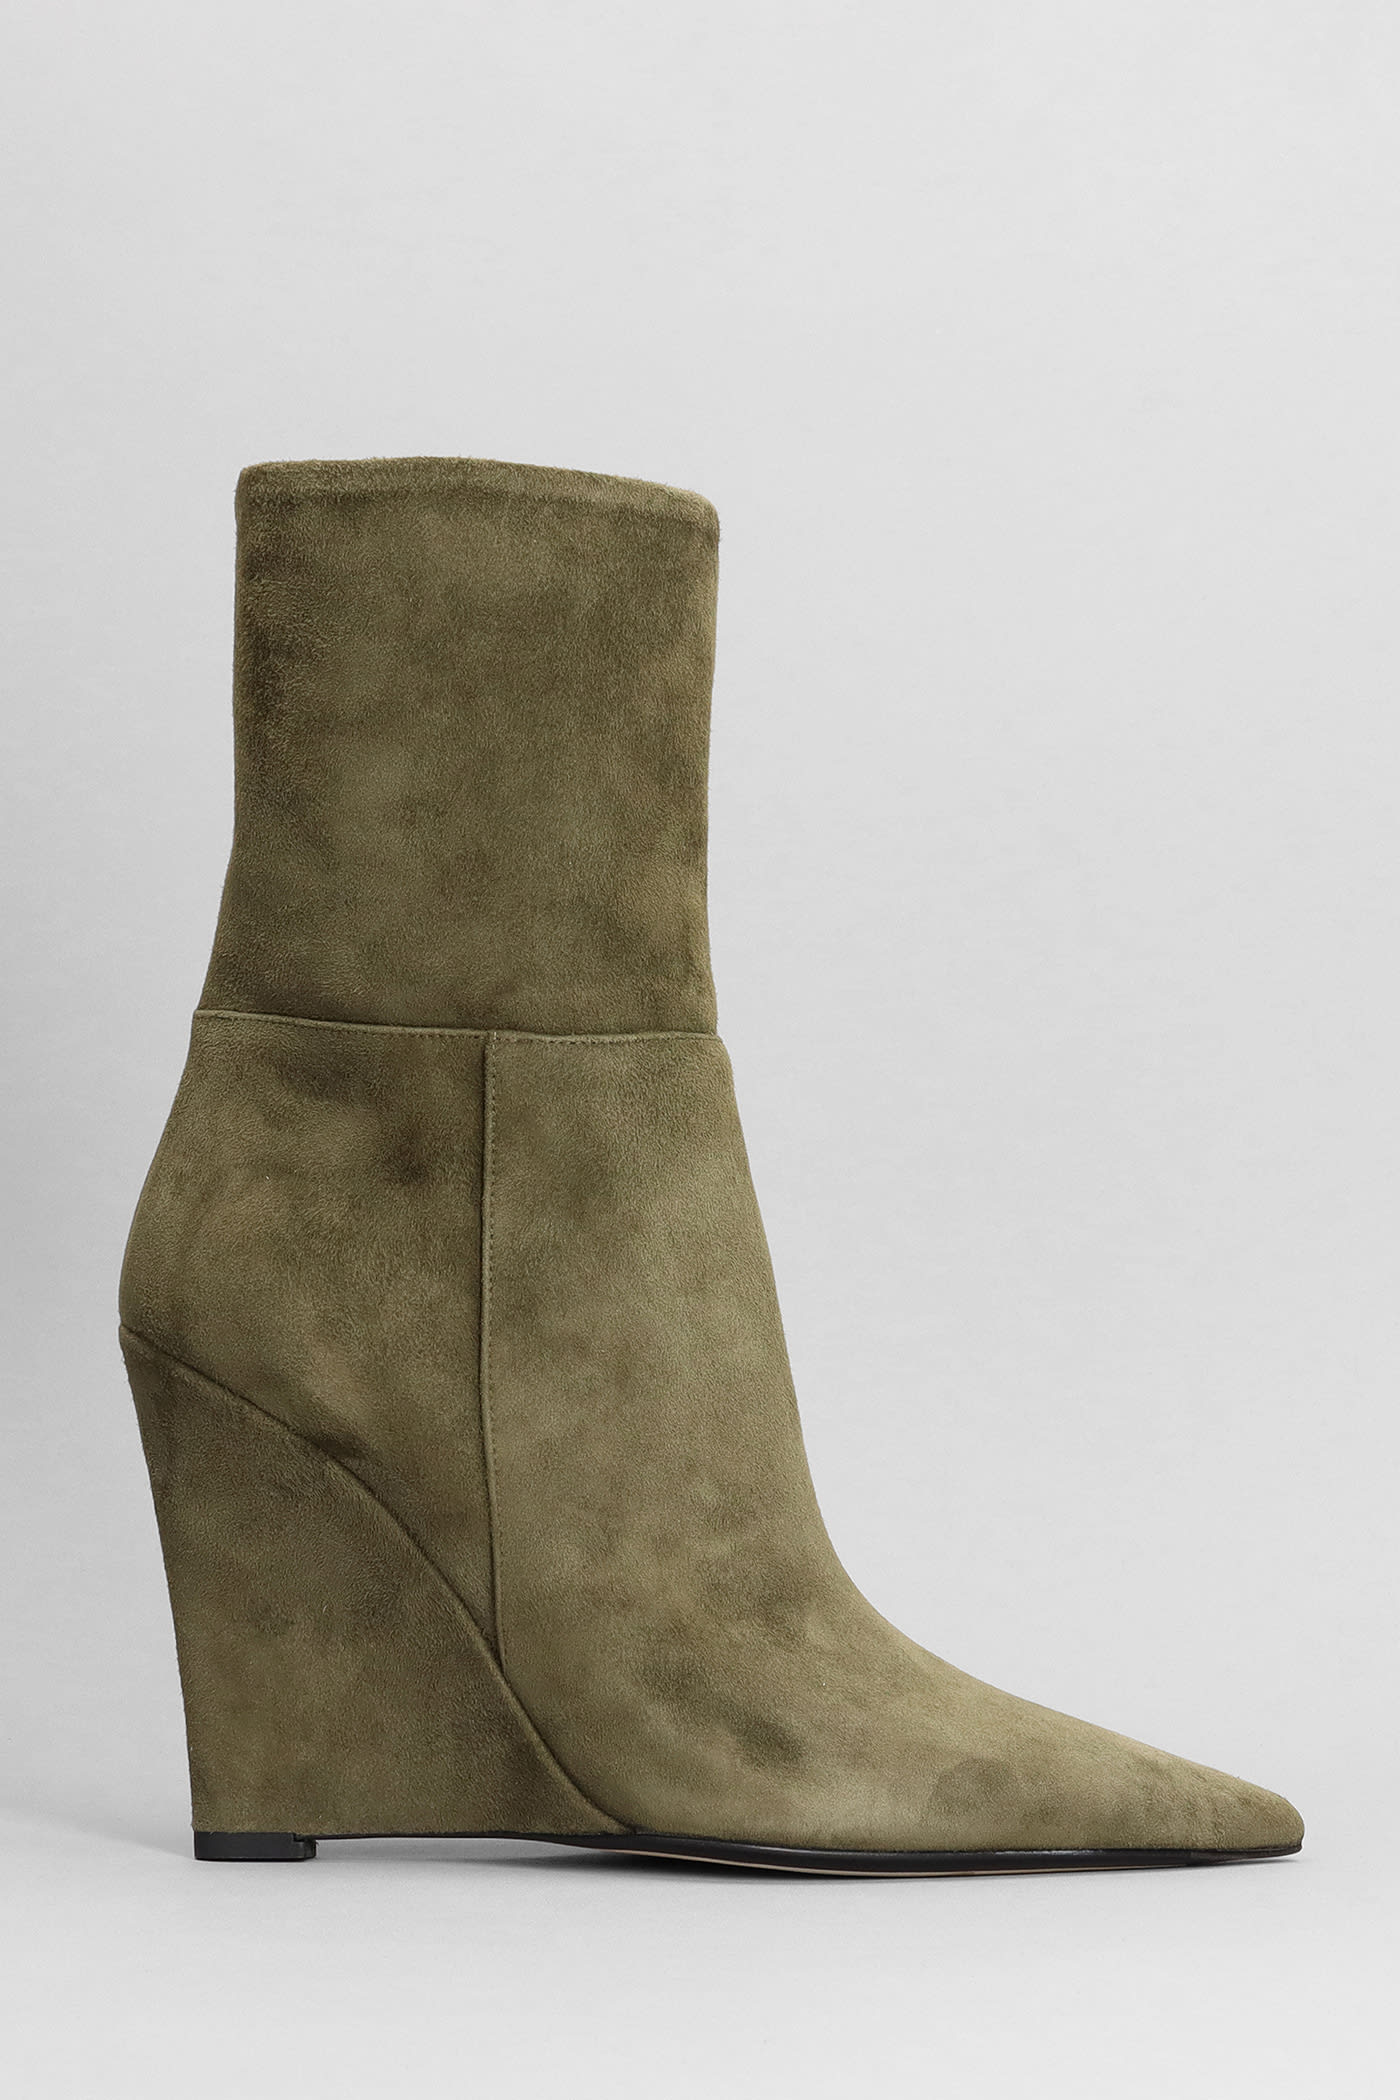 Bay 100 High Heels Ankle Boots In Green Suede